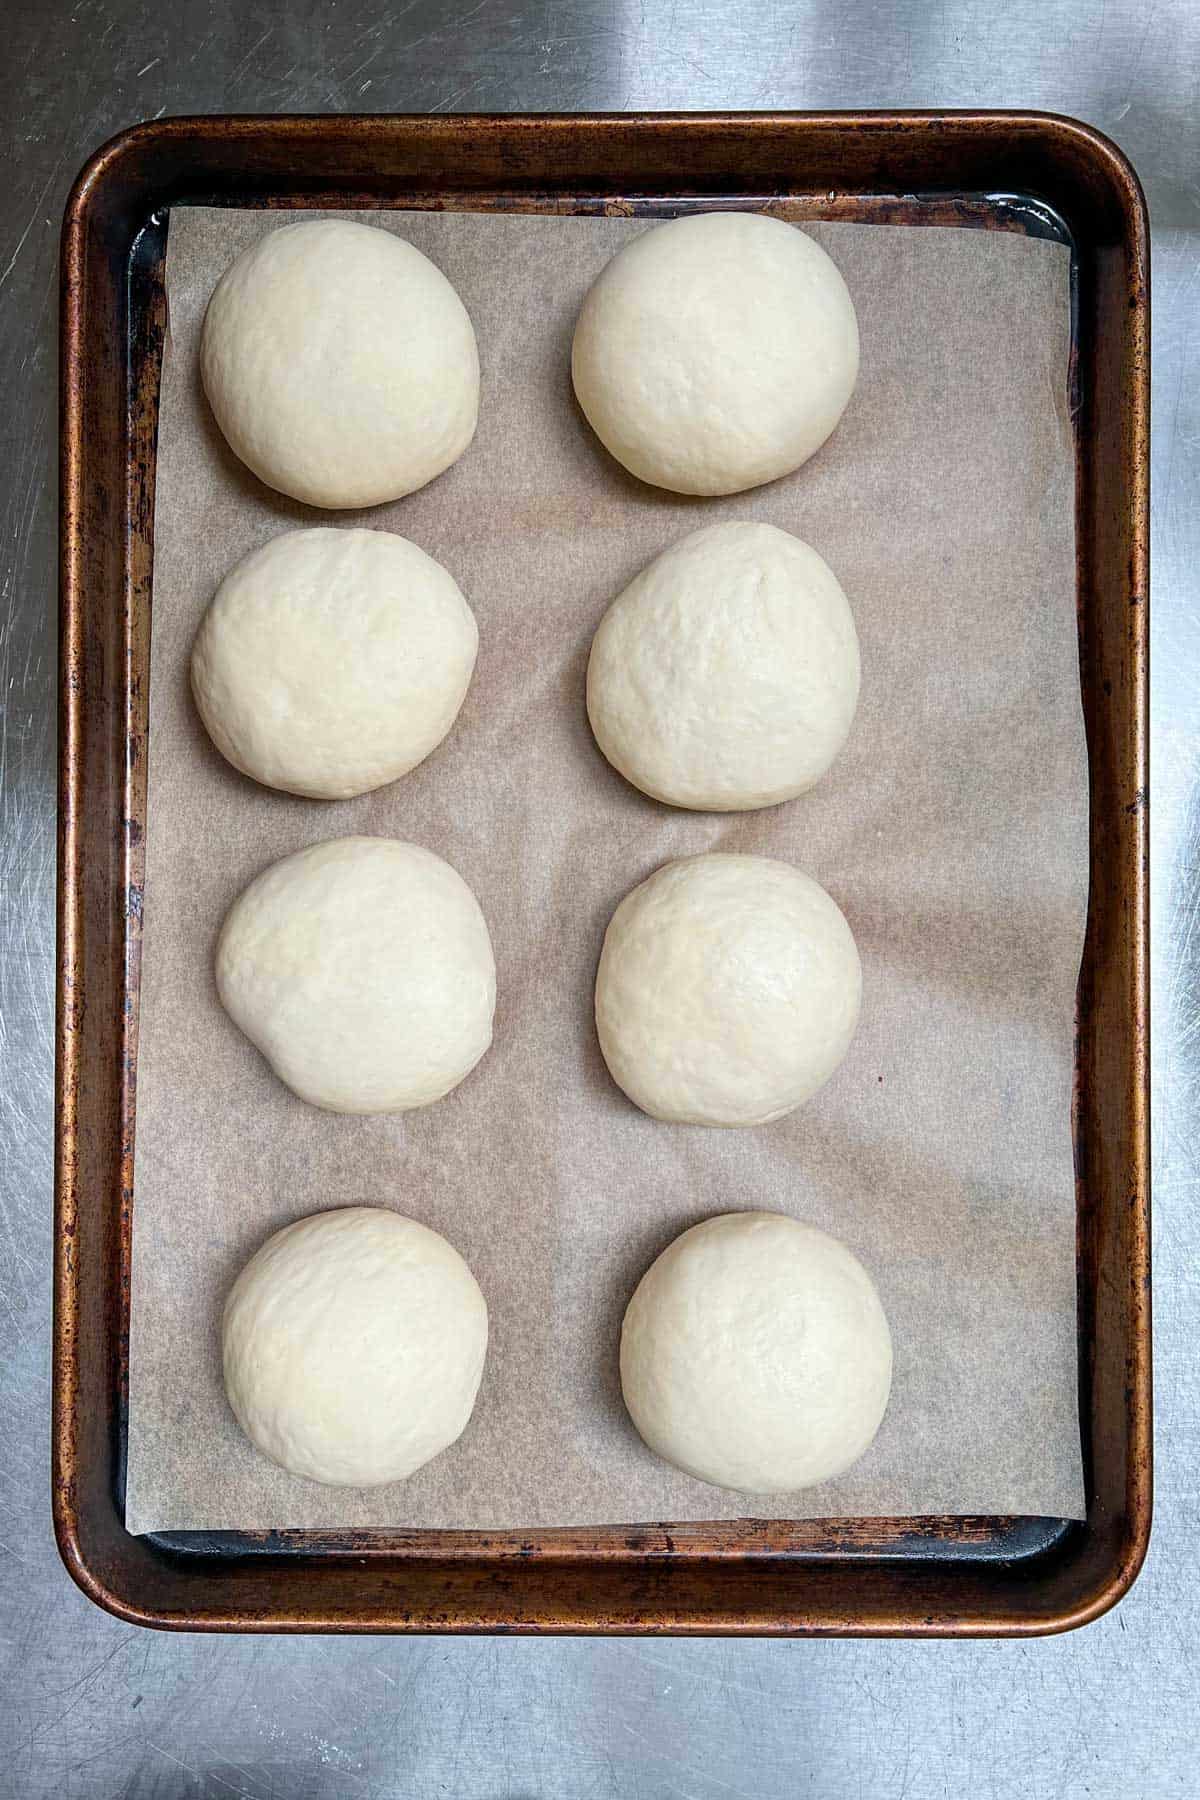 8 balls of dough on a parchment lined rimmed baking sheet